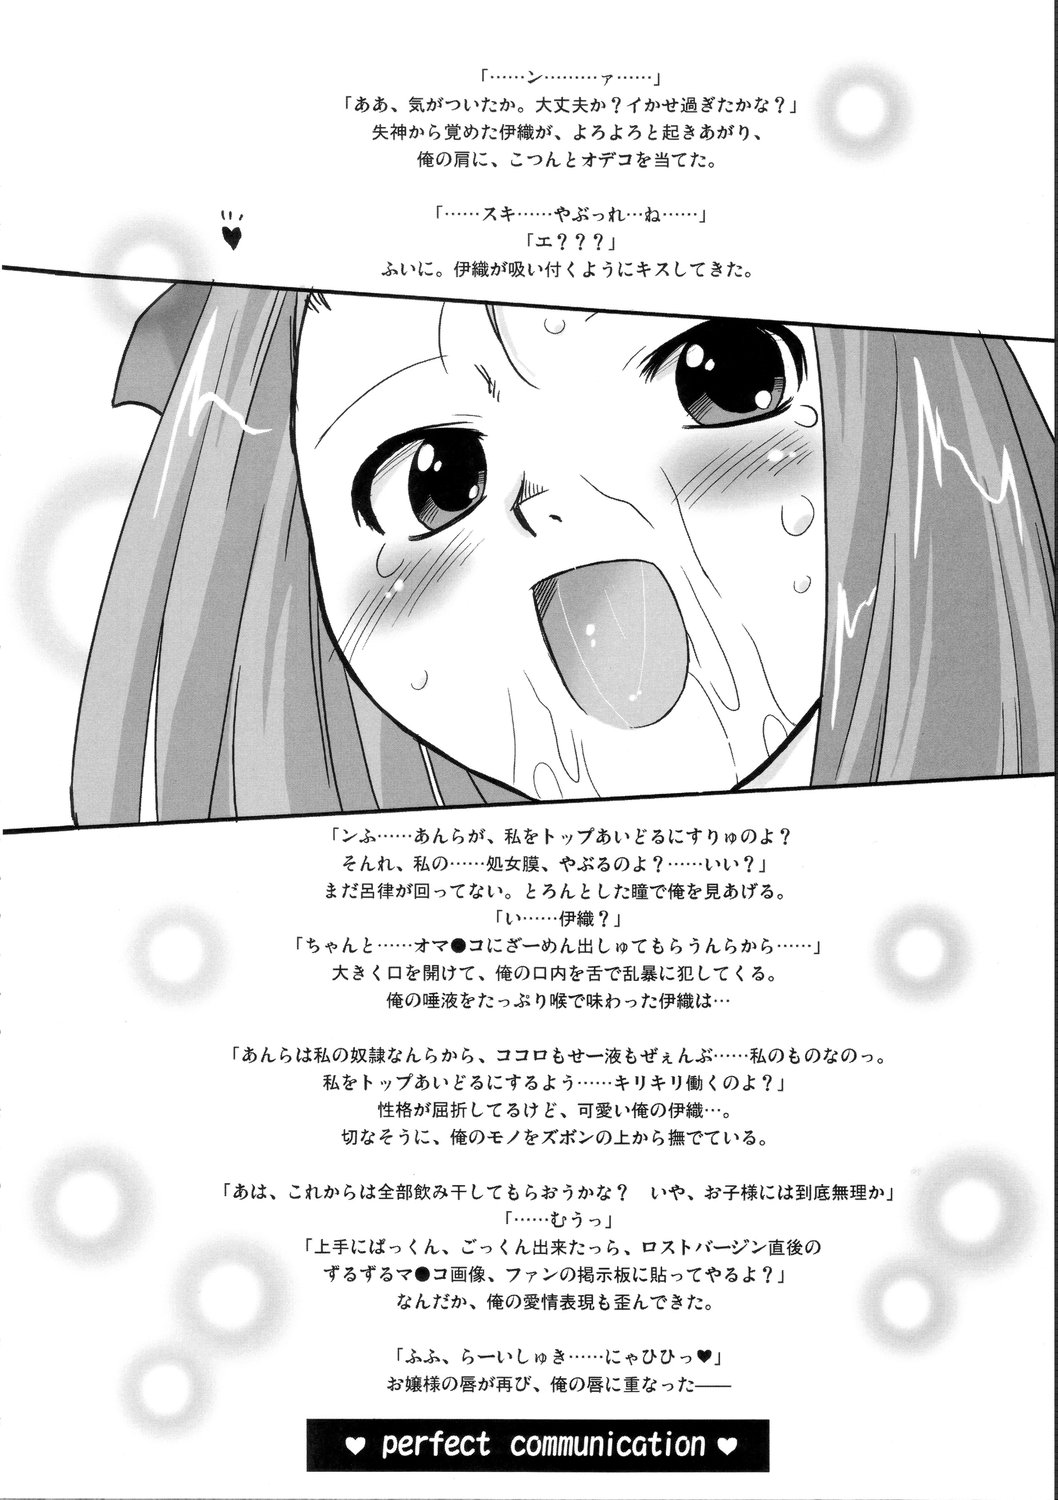 (SC34) [Ohtado (Oota Takeshi)] P-LOVE＠Idol! (THE iDOLM@STER) page 17 full